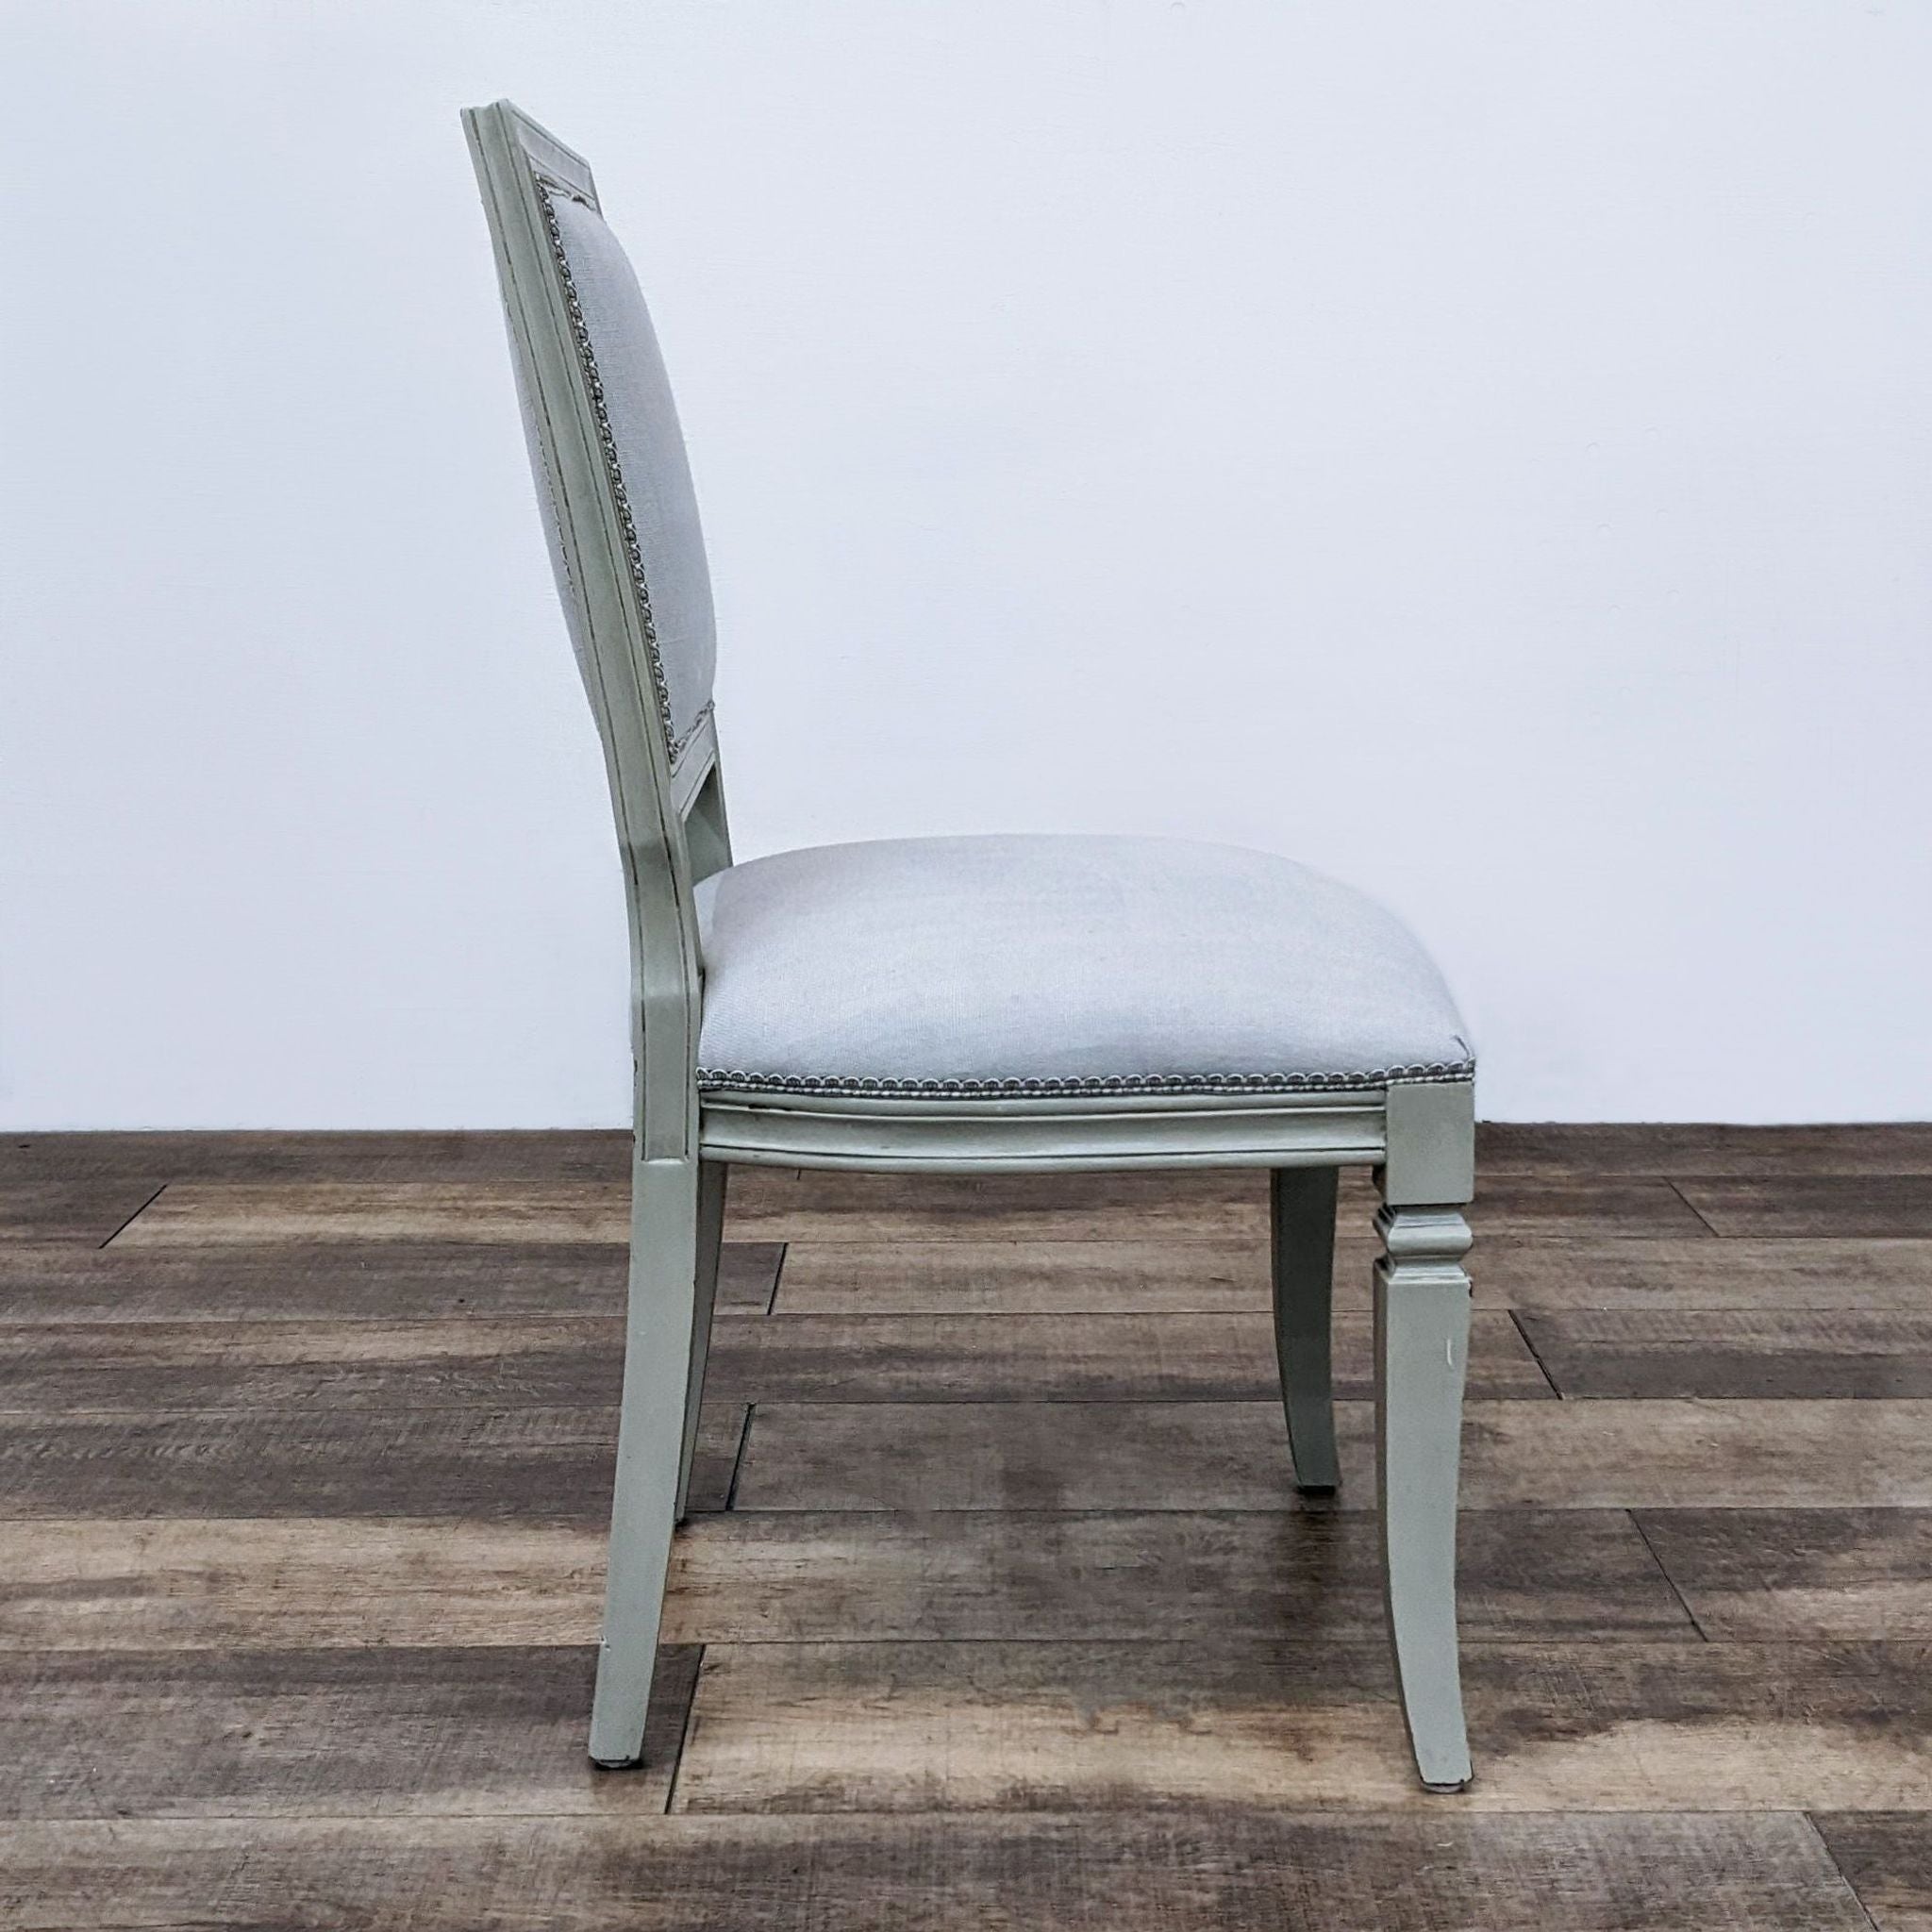 Weathered wooden dining chair by Reperch with a vintage French design, featuring an upholstered cushioned seat and backrest.